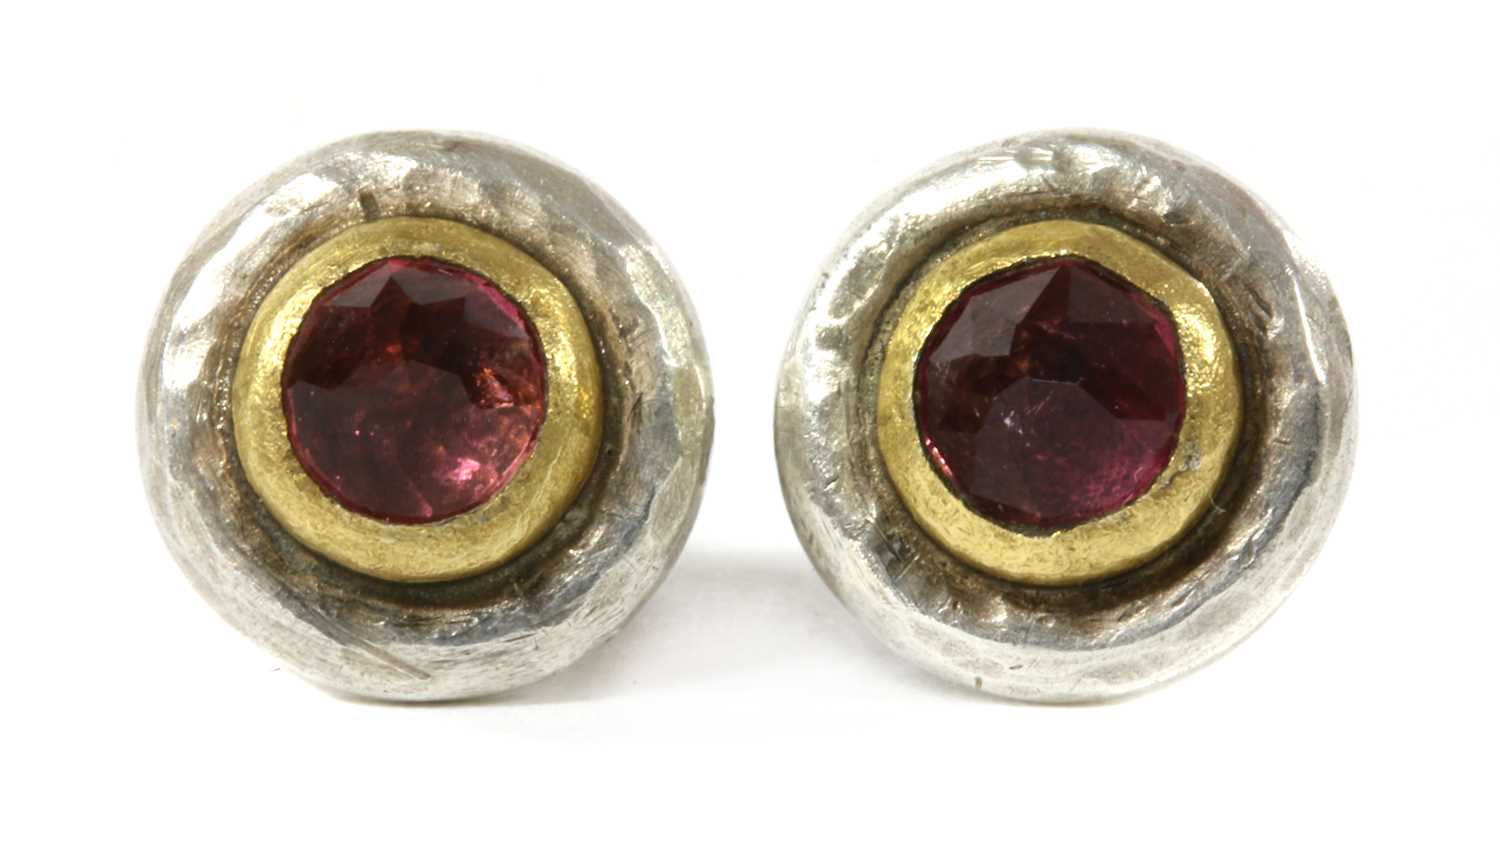 Lot 153 - A pair of silver and gold, pink tourmaline earrings, by Poppy Dandiya